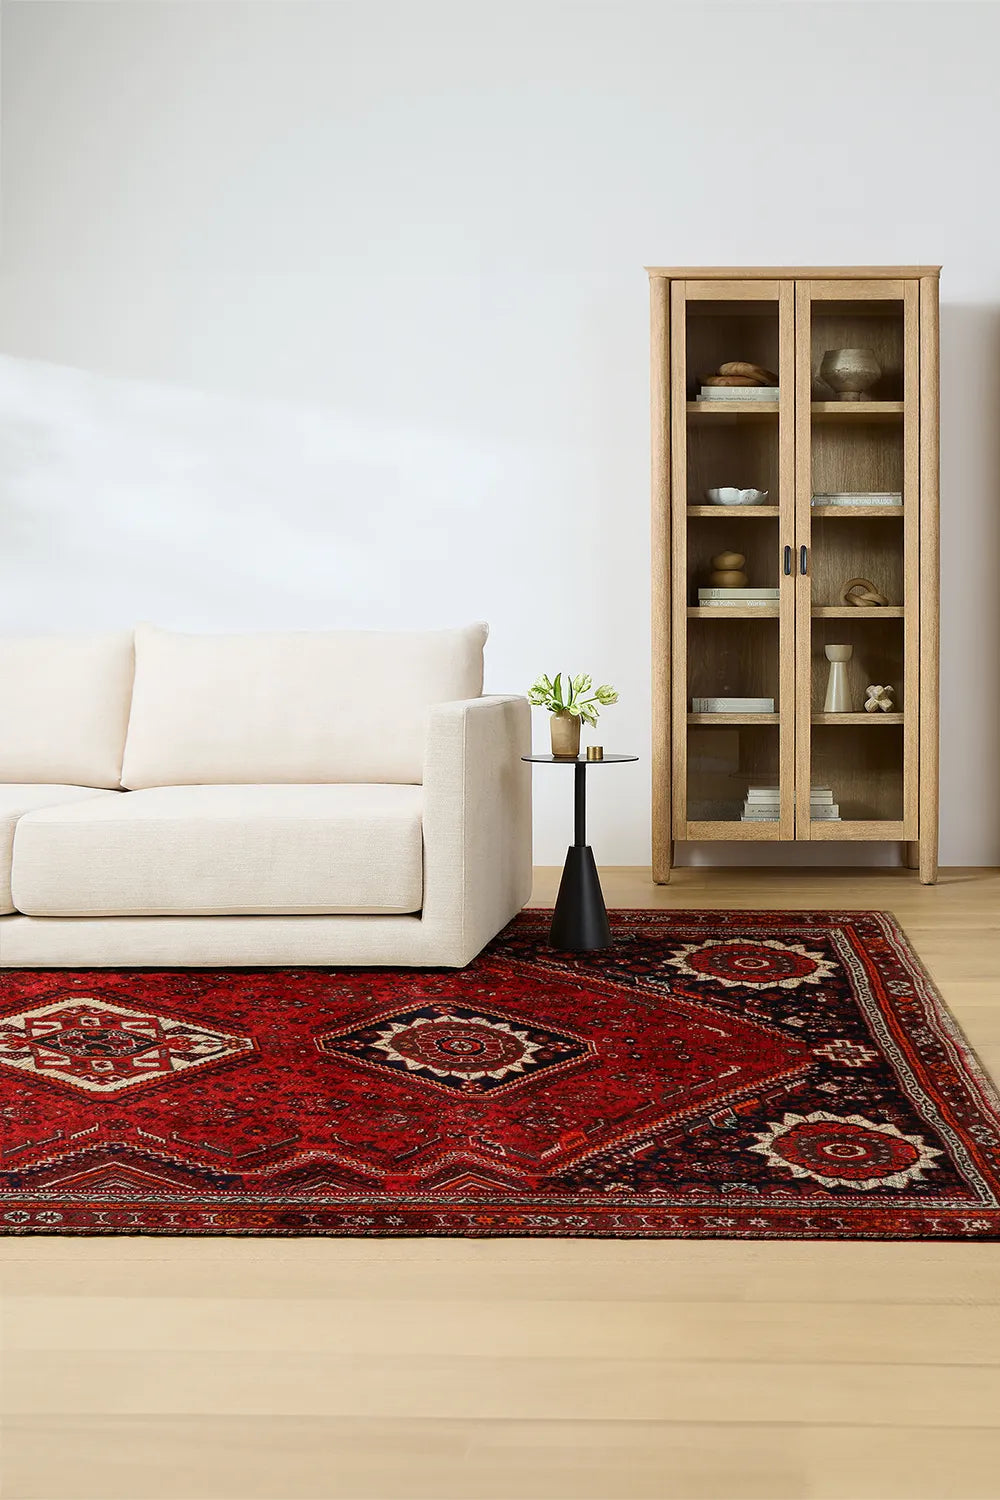 Shiraz  Hand Knotted Wool Rug  258x177cm